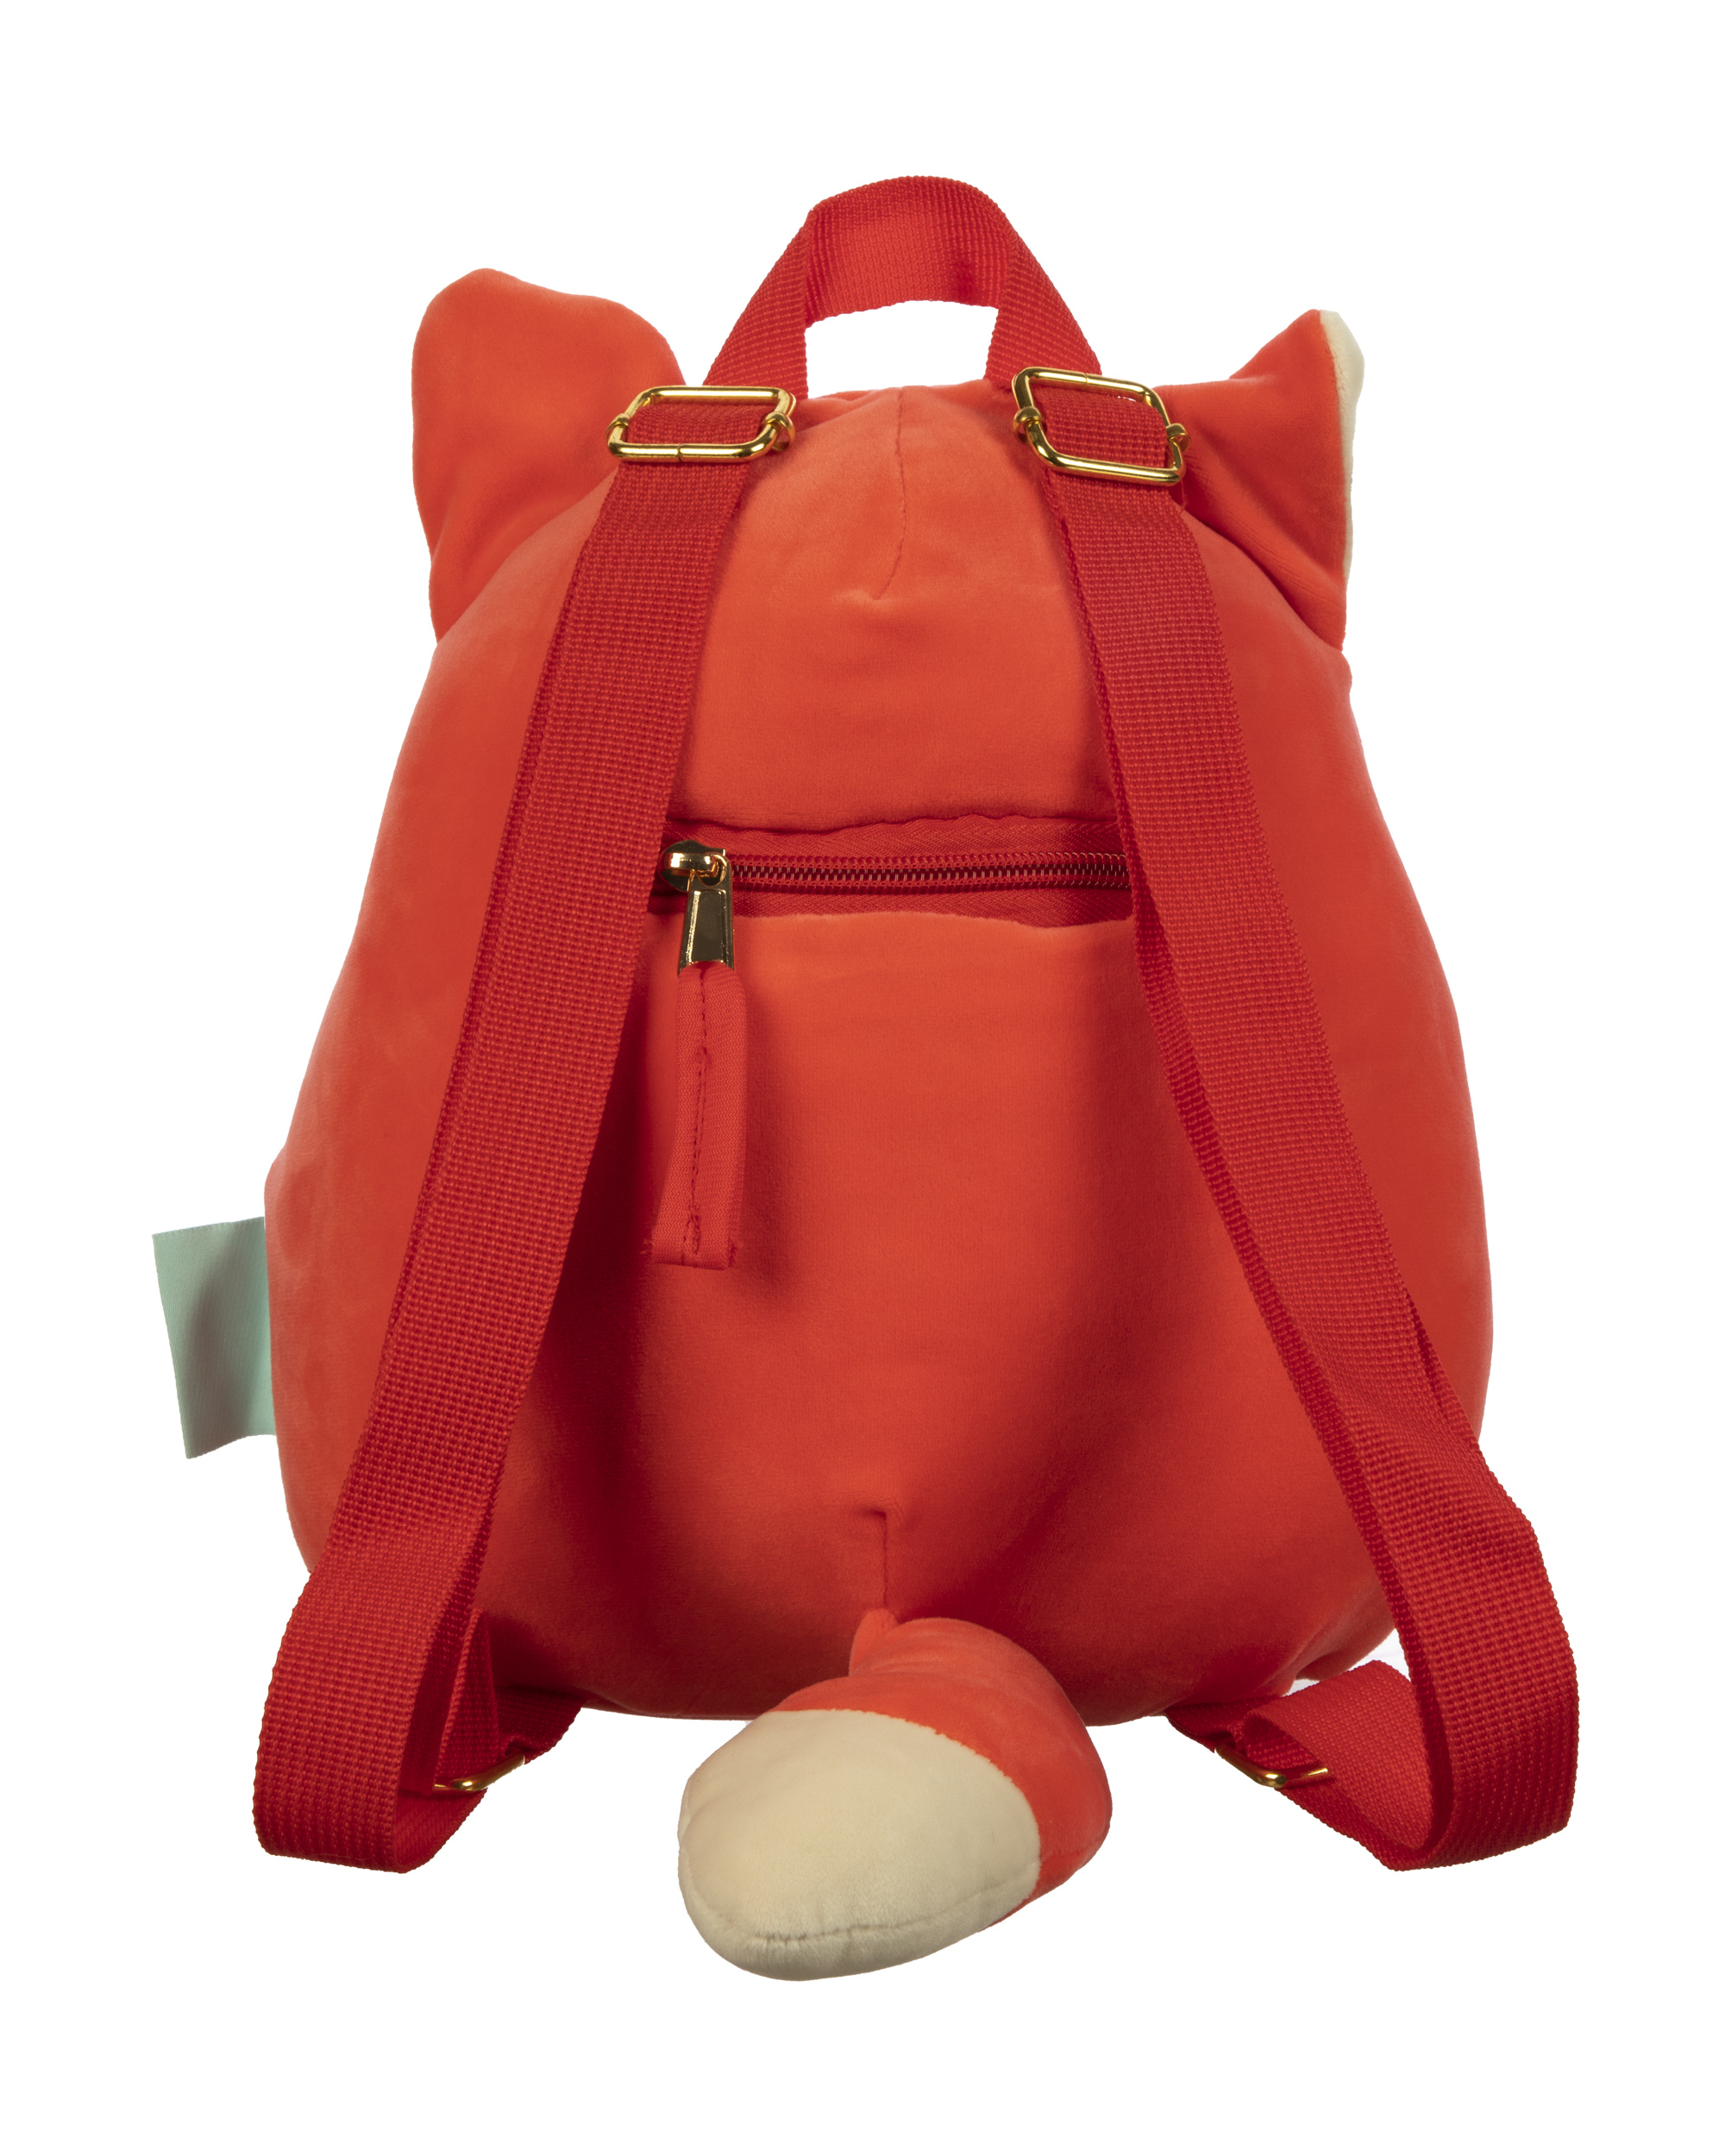 Squishmallows Fifi Fox 2pc  Travel Set with 18" Luggage and 10" Plush Backpack - image 7 of 9